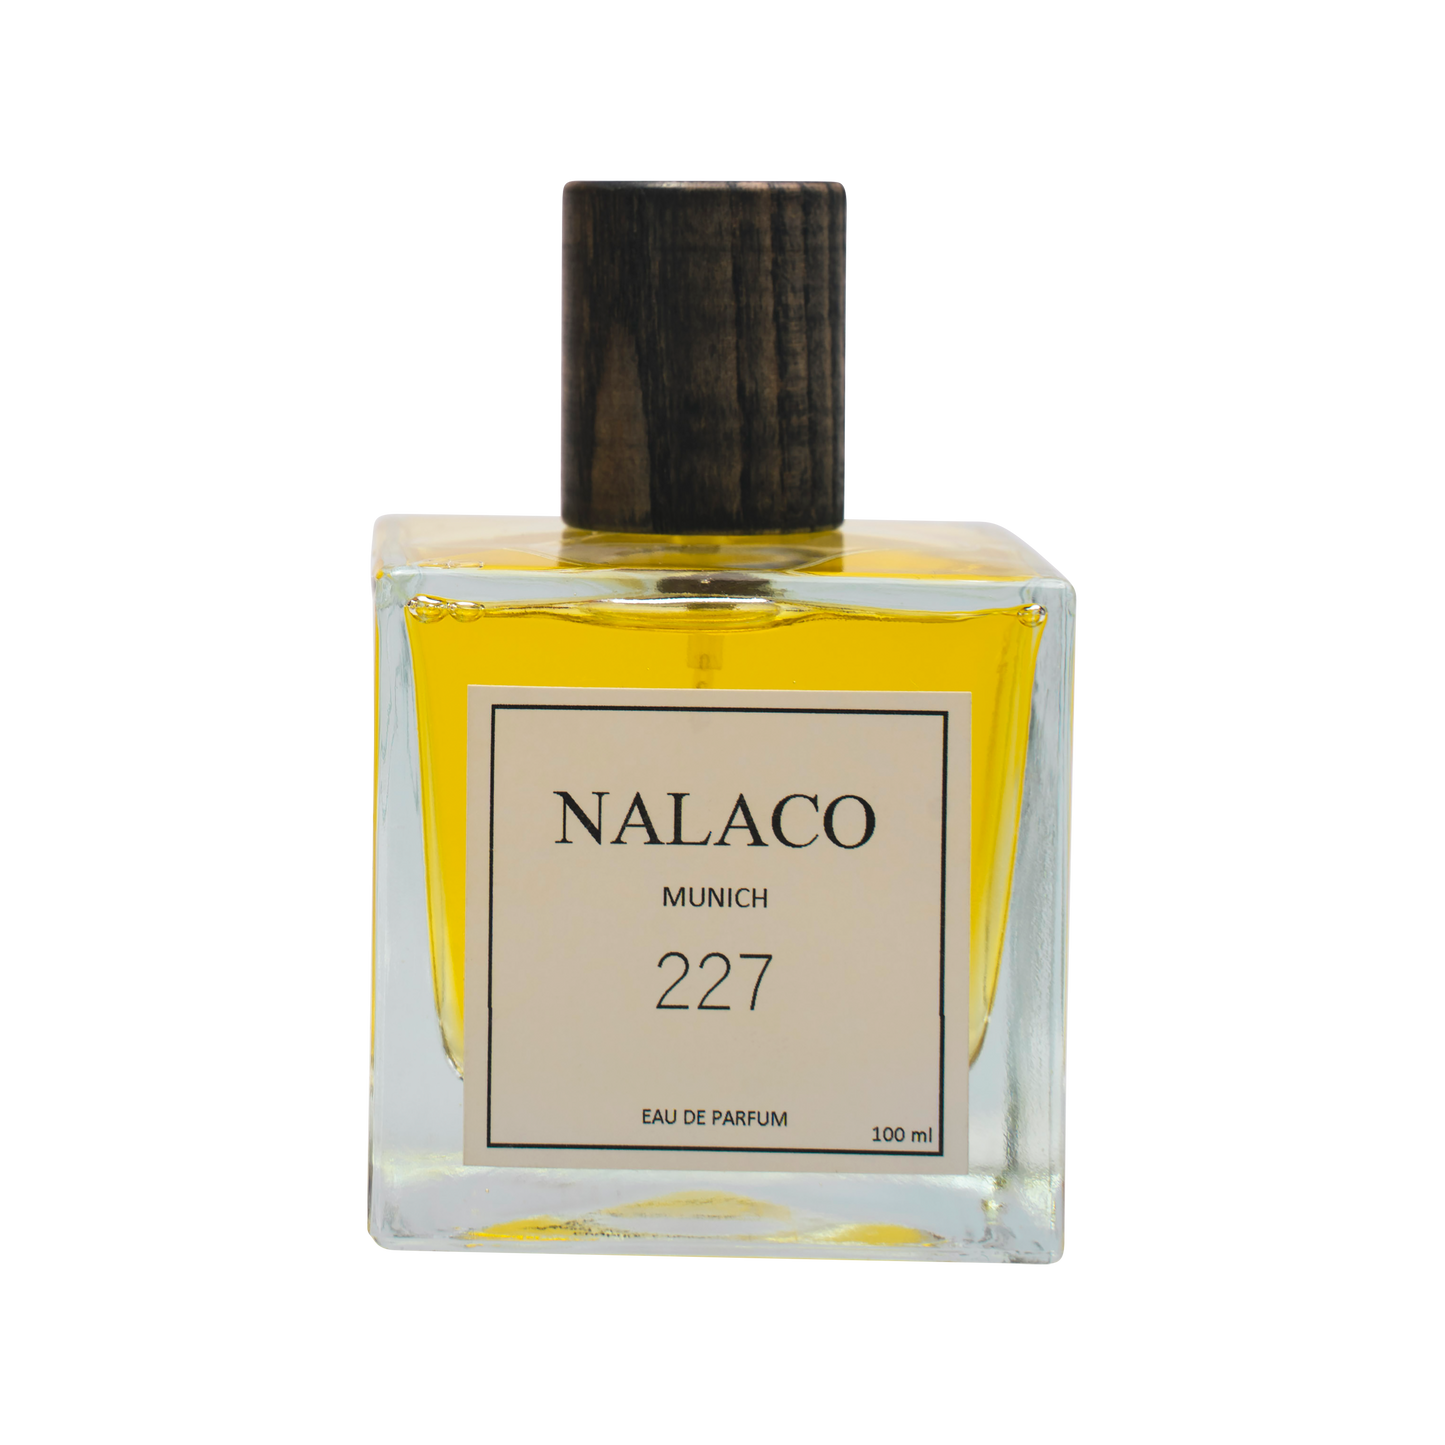 Nalaco No. 227 inspired by Tom Ford Tabacco Vanille